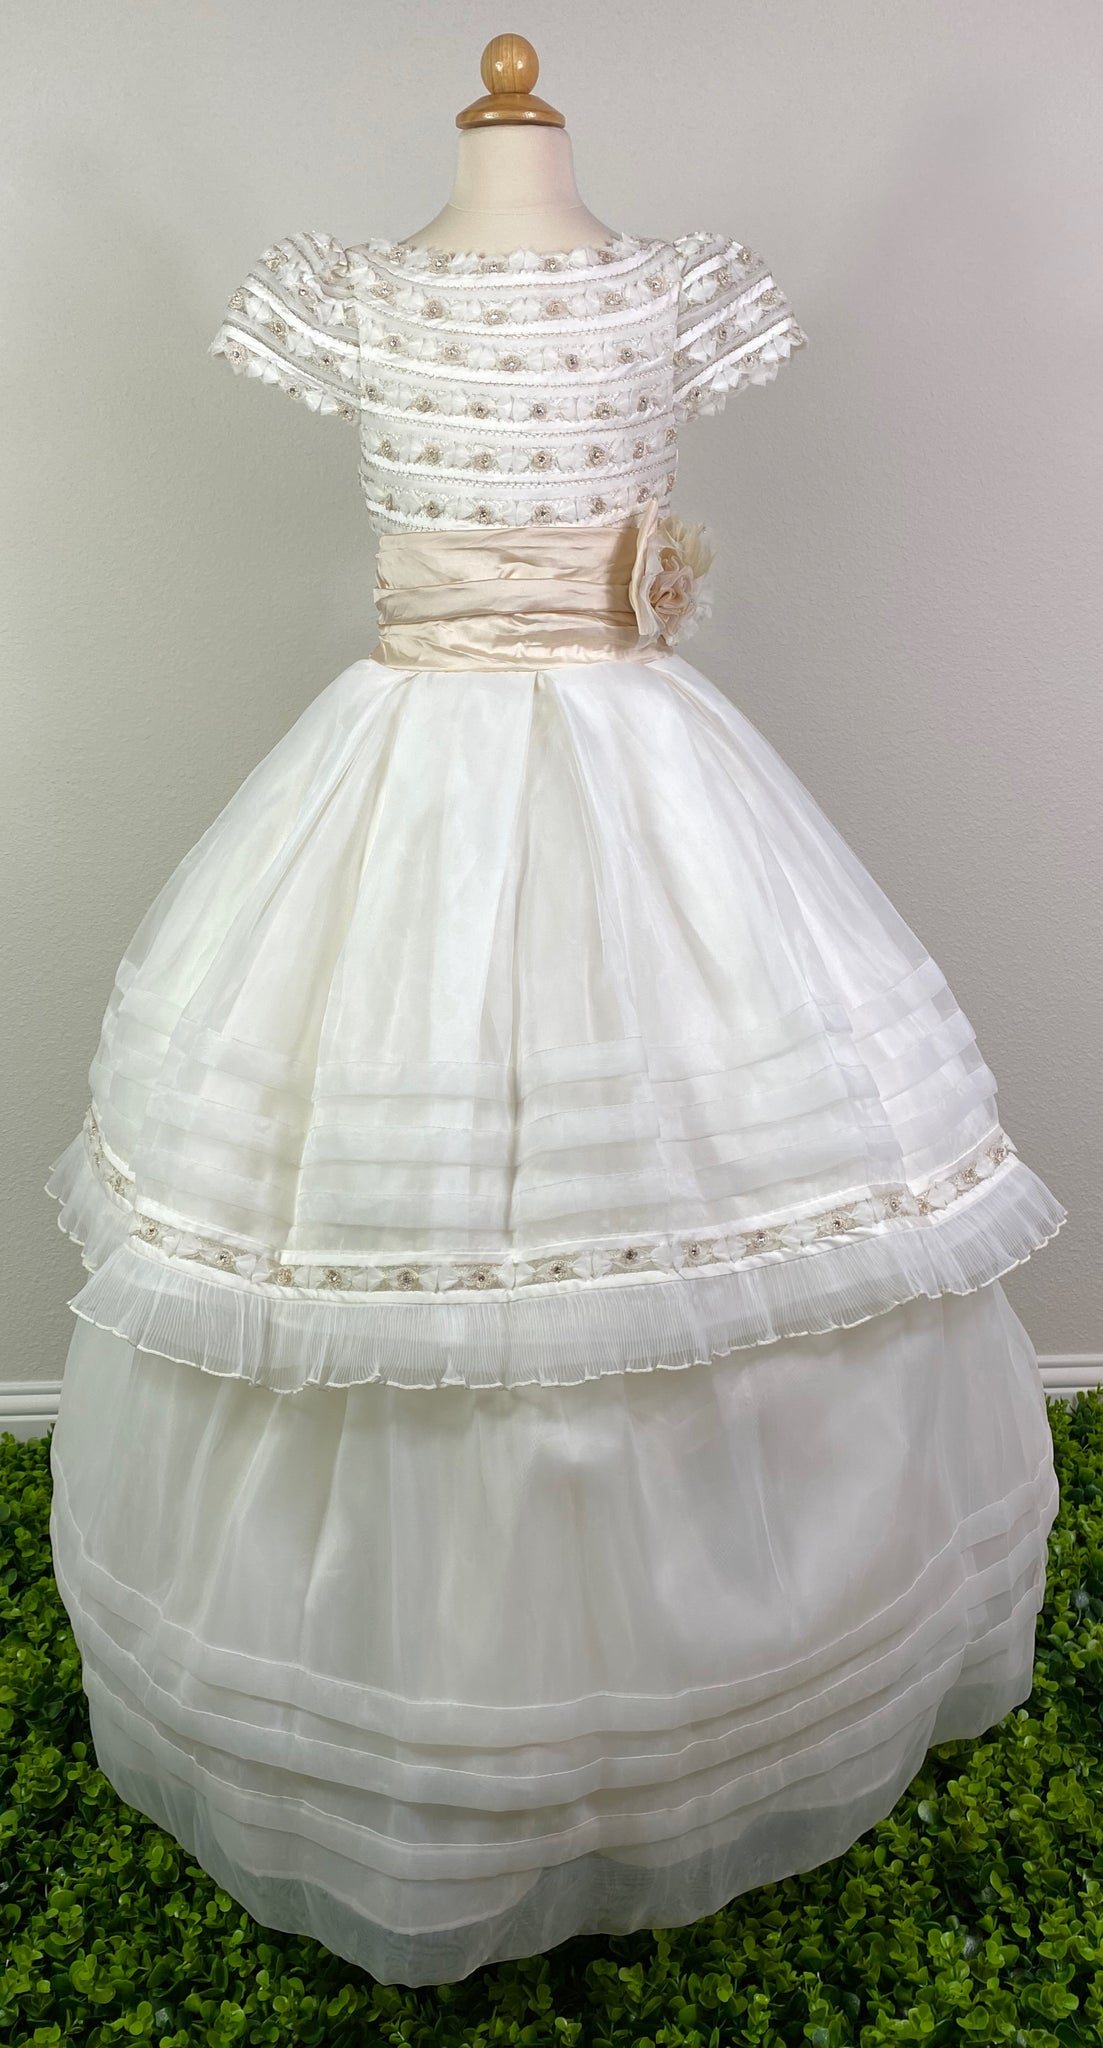 Ivory, size 12 Hand-stitched columned satin and flower bodice with crystals Extended scoop neckline Champagne cummerbund with ruffled bow Ivory tulle skirt with pleated trim and stripes along bottom Detachable skirt for long dress or short dress Satin covered button closure Champagne satin ribbon for large bow